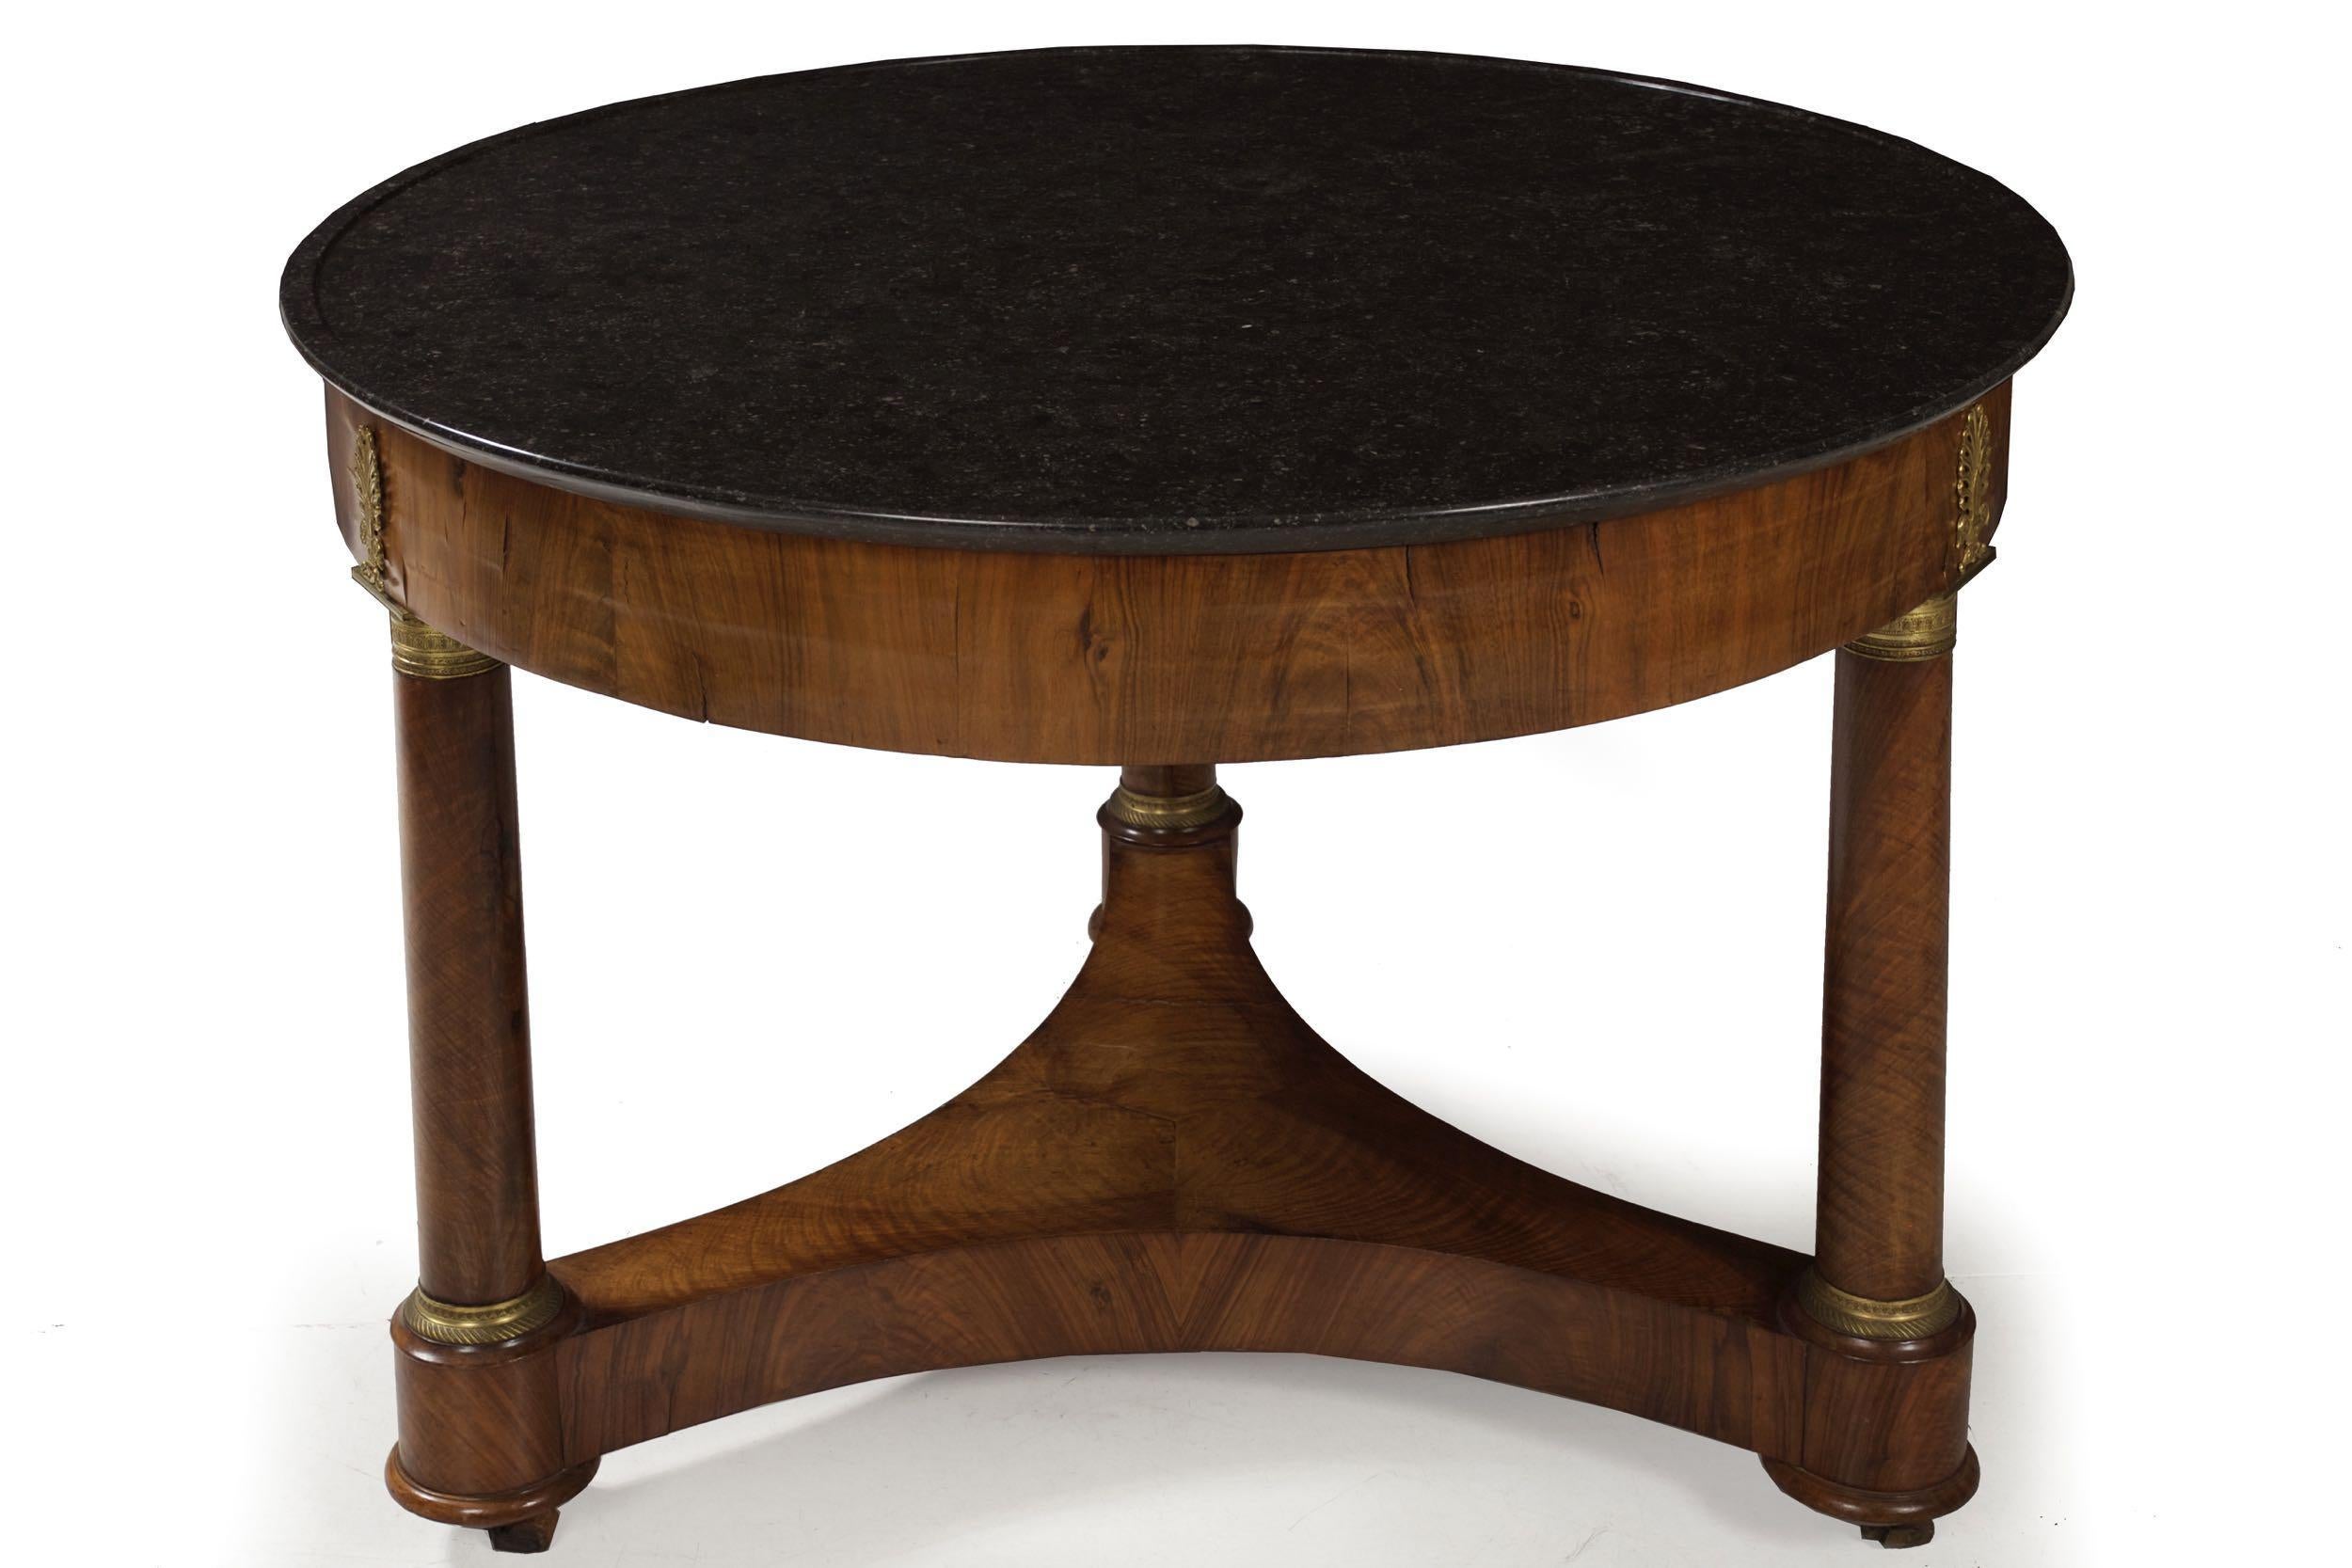 EMPIRE ORMOLU-MOUNTED BURL WALNUT CENTER TABLE
With an original dished black marble top; France, circa 1815
Item # 101OPB21A 

A very fine Empire center table crafted of beautifully patinated burl walnut veneers over secondary woods, the table